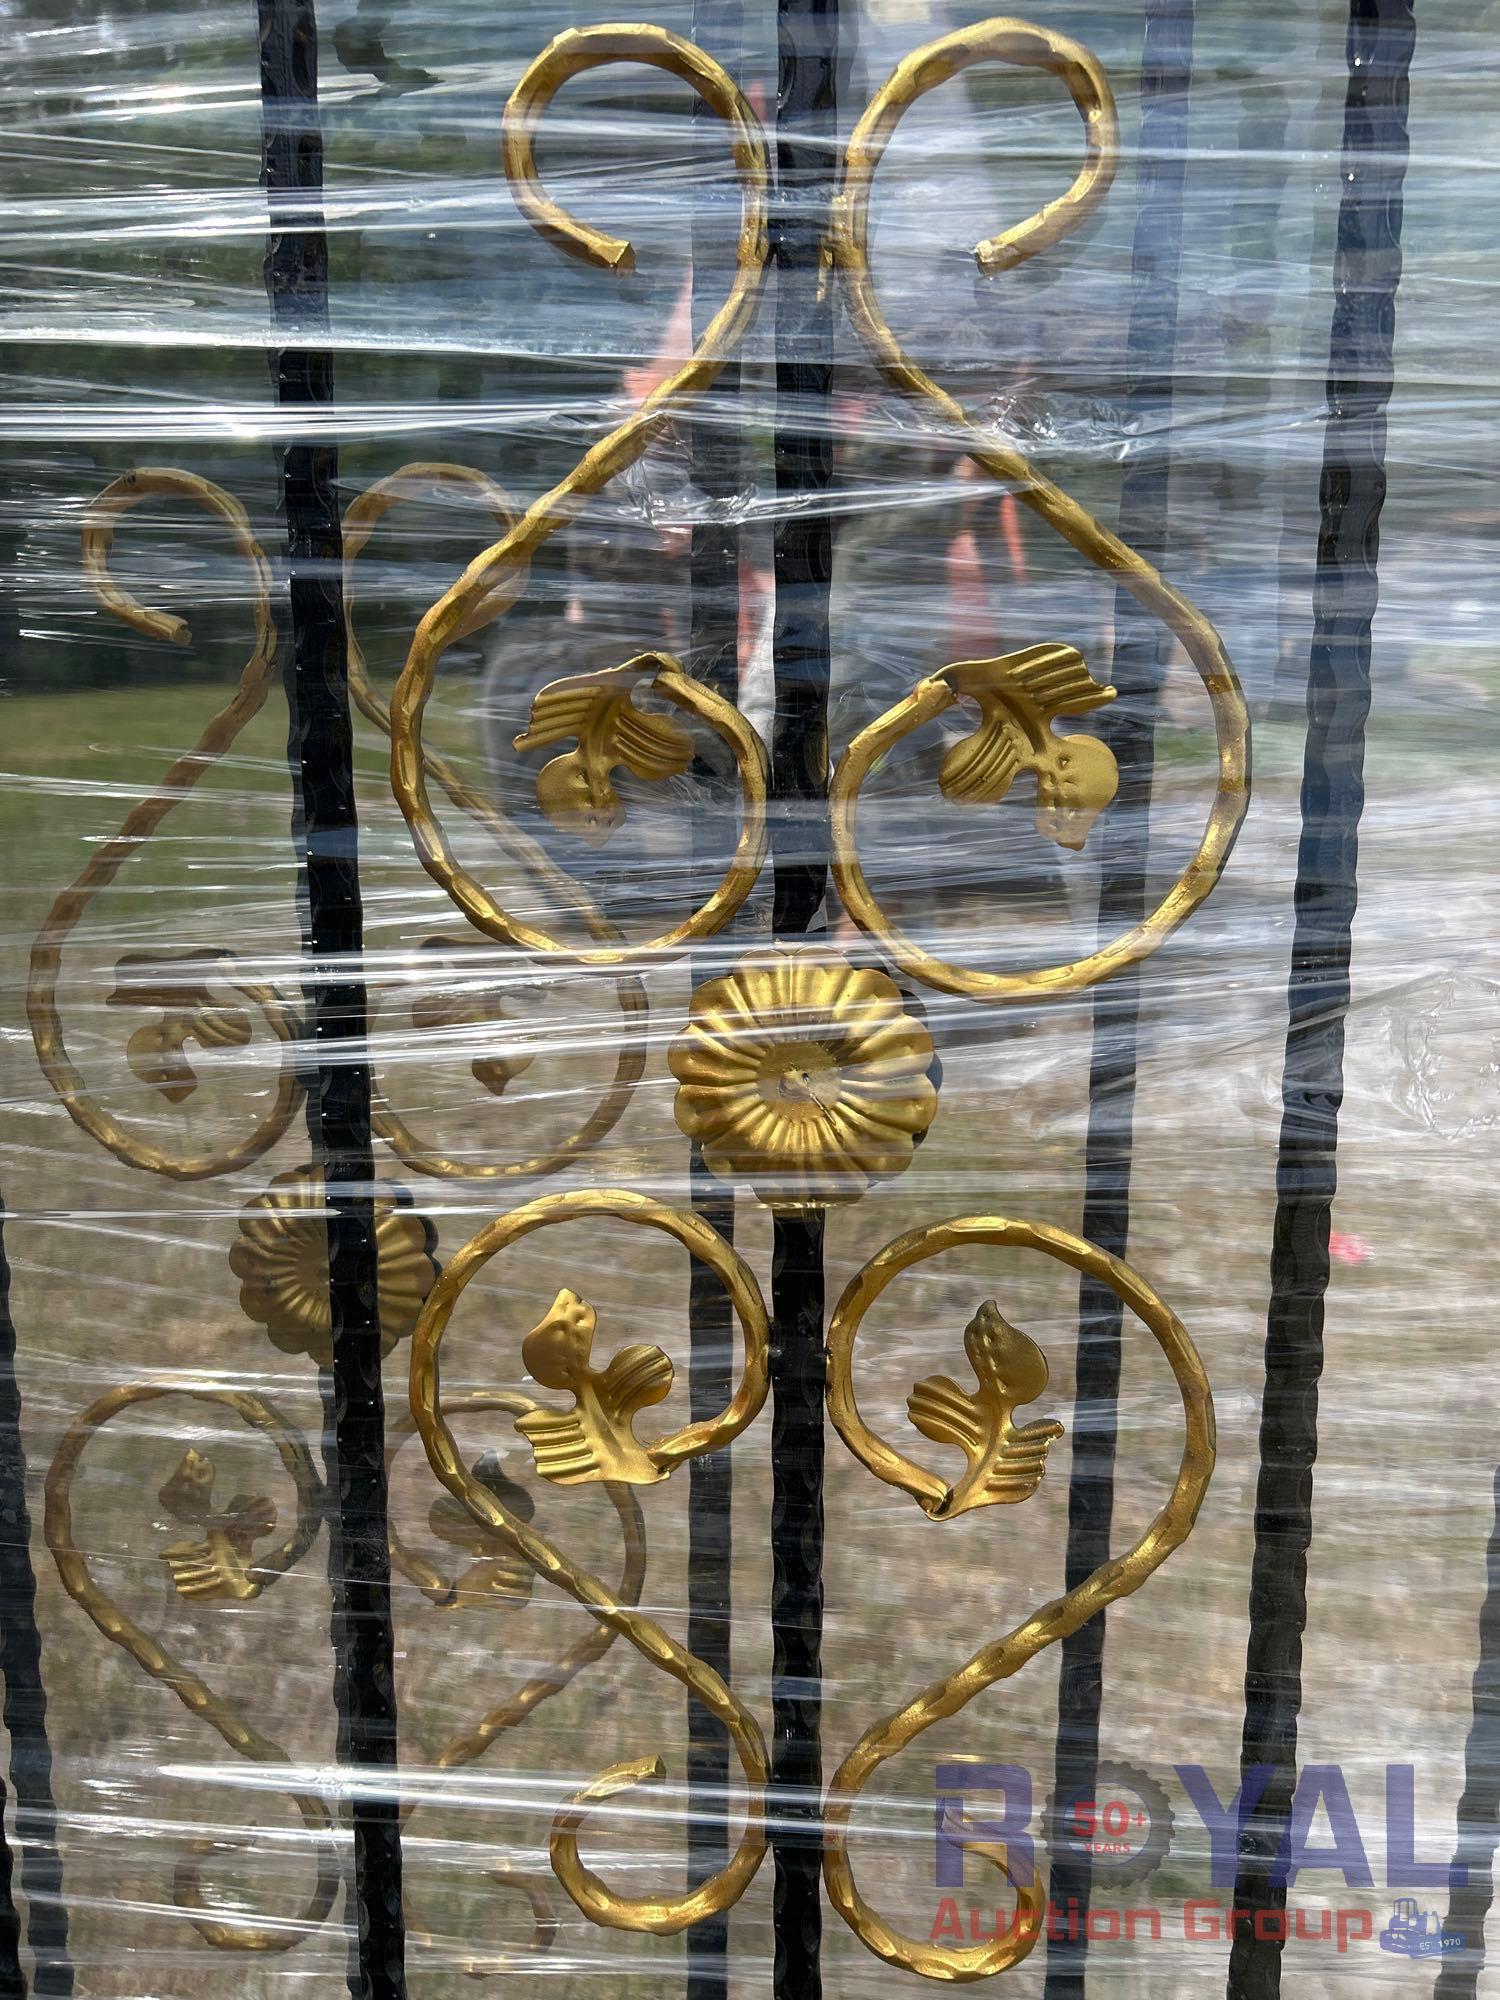 20ft Gold And Black Wrought Iron Gates